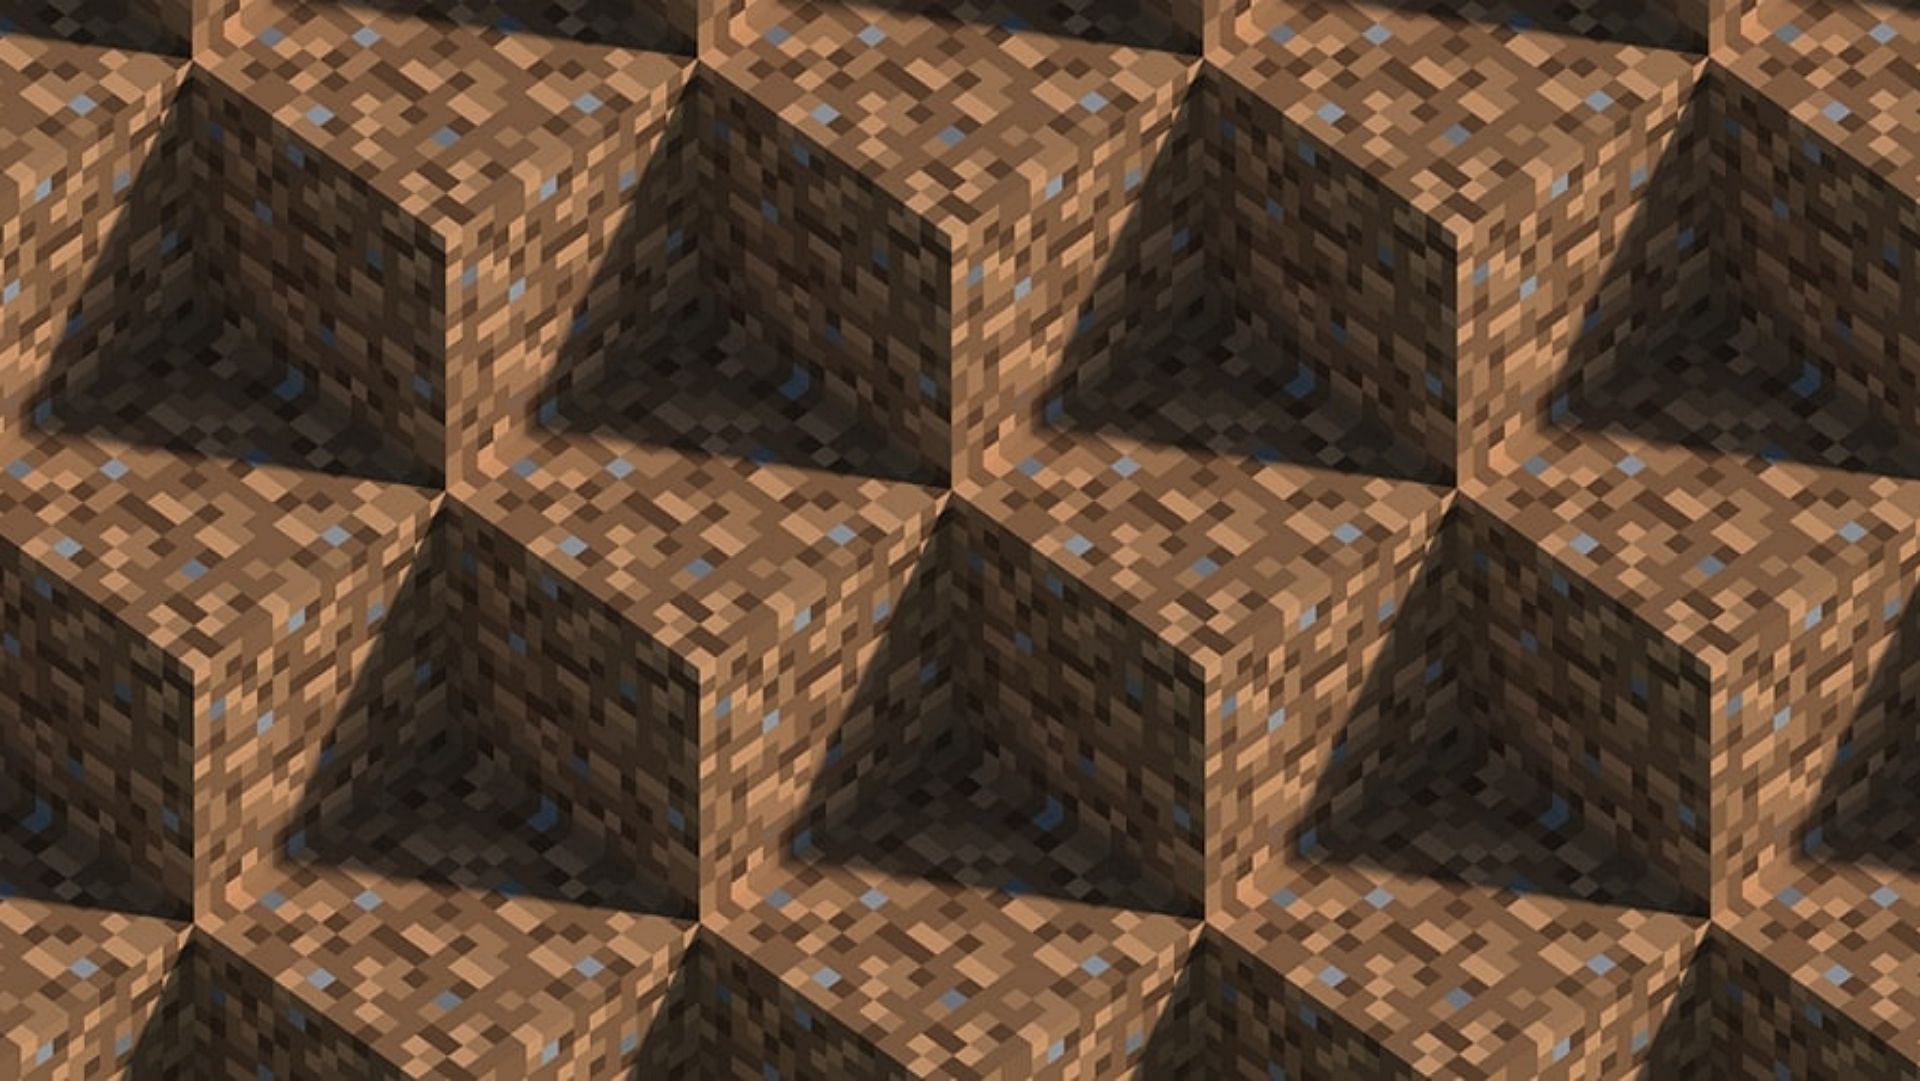 Dirt blocks can be used for several purposes in Minecraft (Image via Mojang)